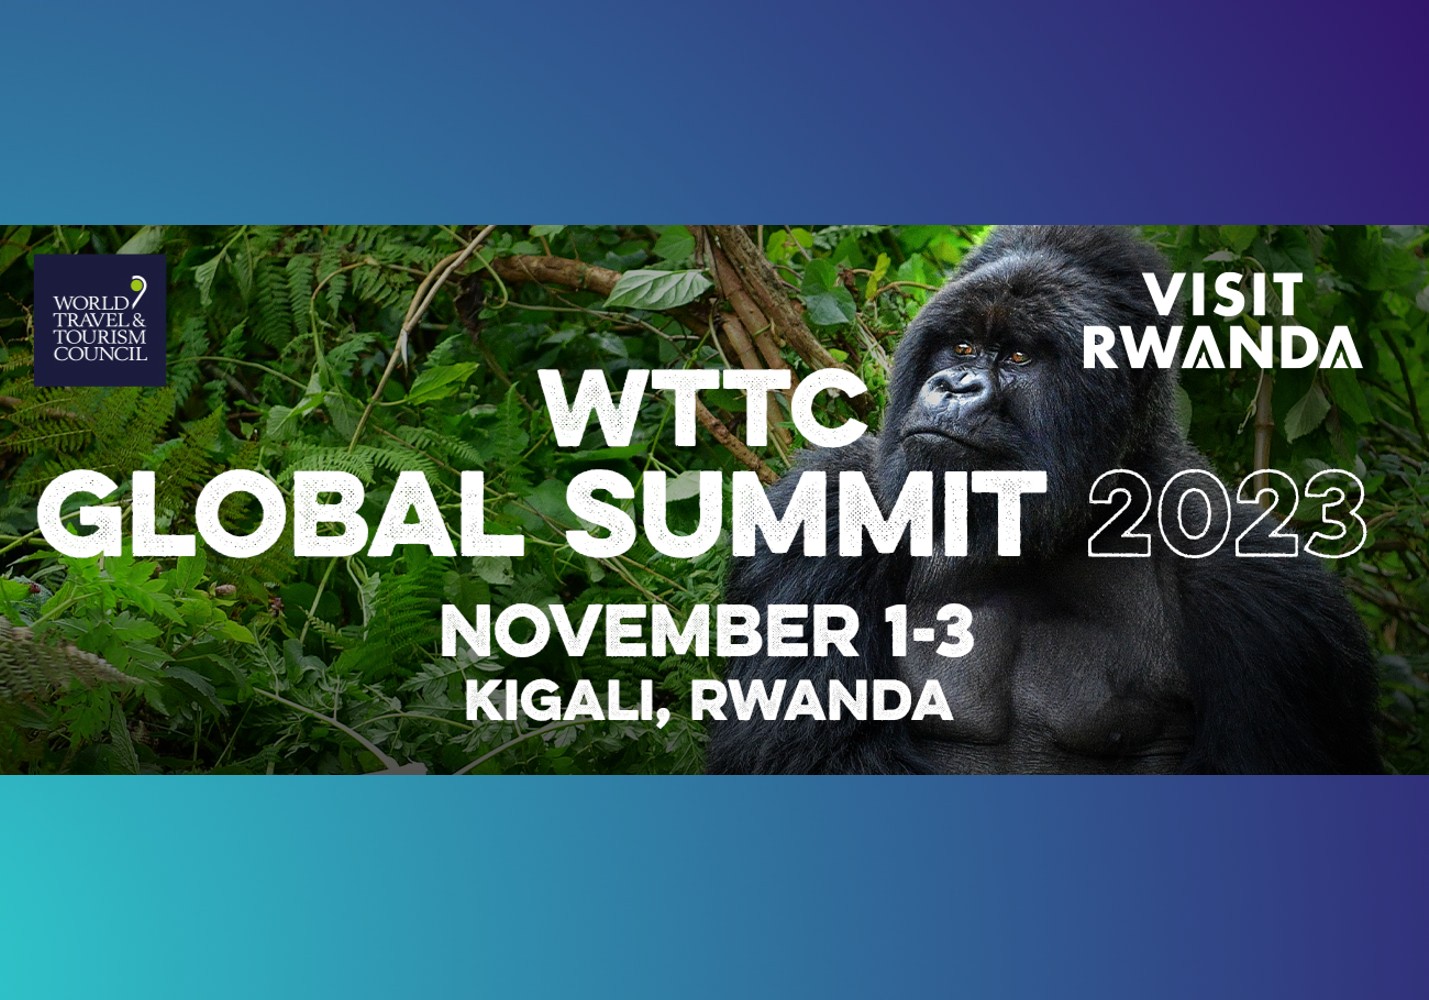 WTTC Global Summit Coming to Africa for the First Time